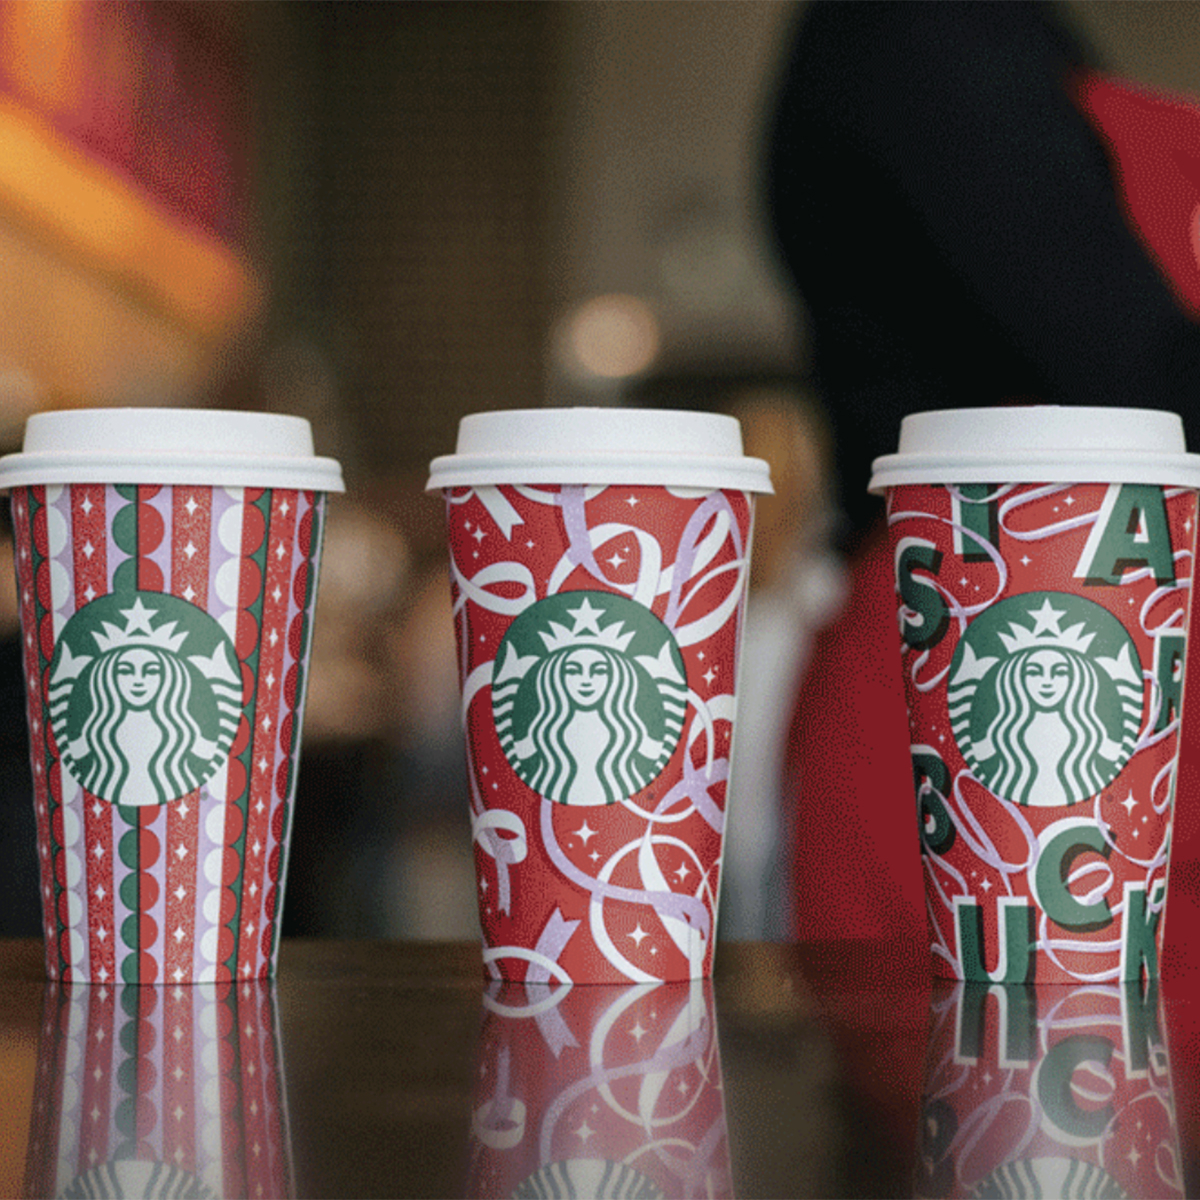 https://akns-images.eonline.com/eol_images/Entire_Site/2021103/rs_1200x1200-211103091444-1200-Starbucks-Holiday-Cups.jpg?fit=around%7C300:169&output-quality=90&crop=300:169;center,top